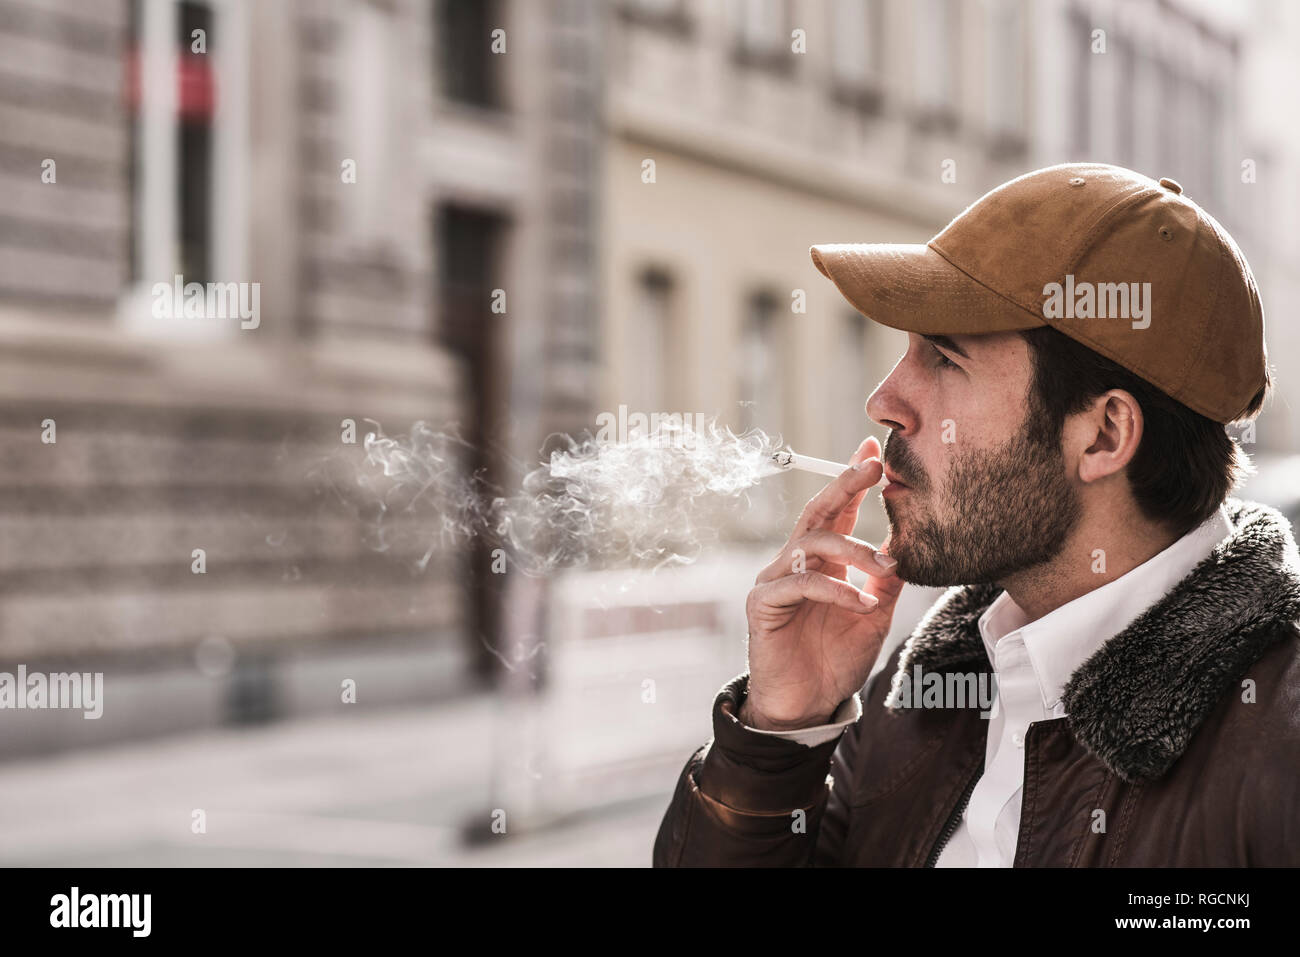 Portrait of young man with baseball cap smoking cigarette Stock Photo